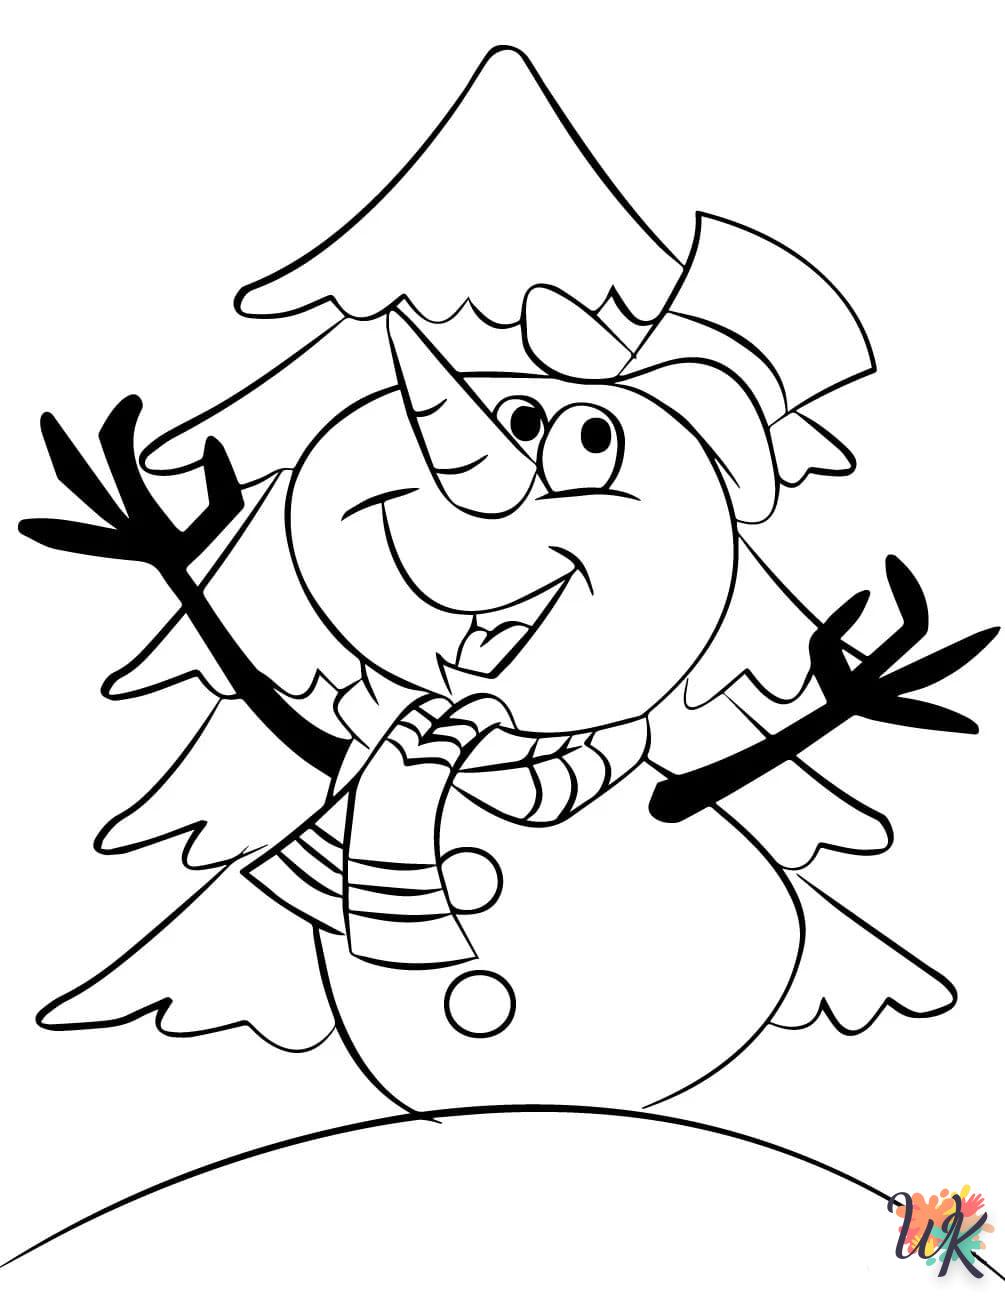 Snowman coloring online to print 1